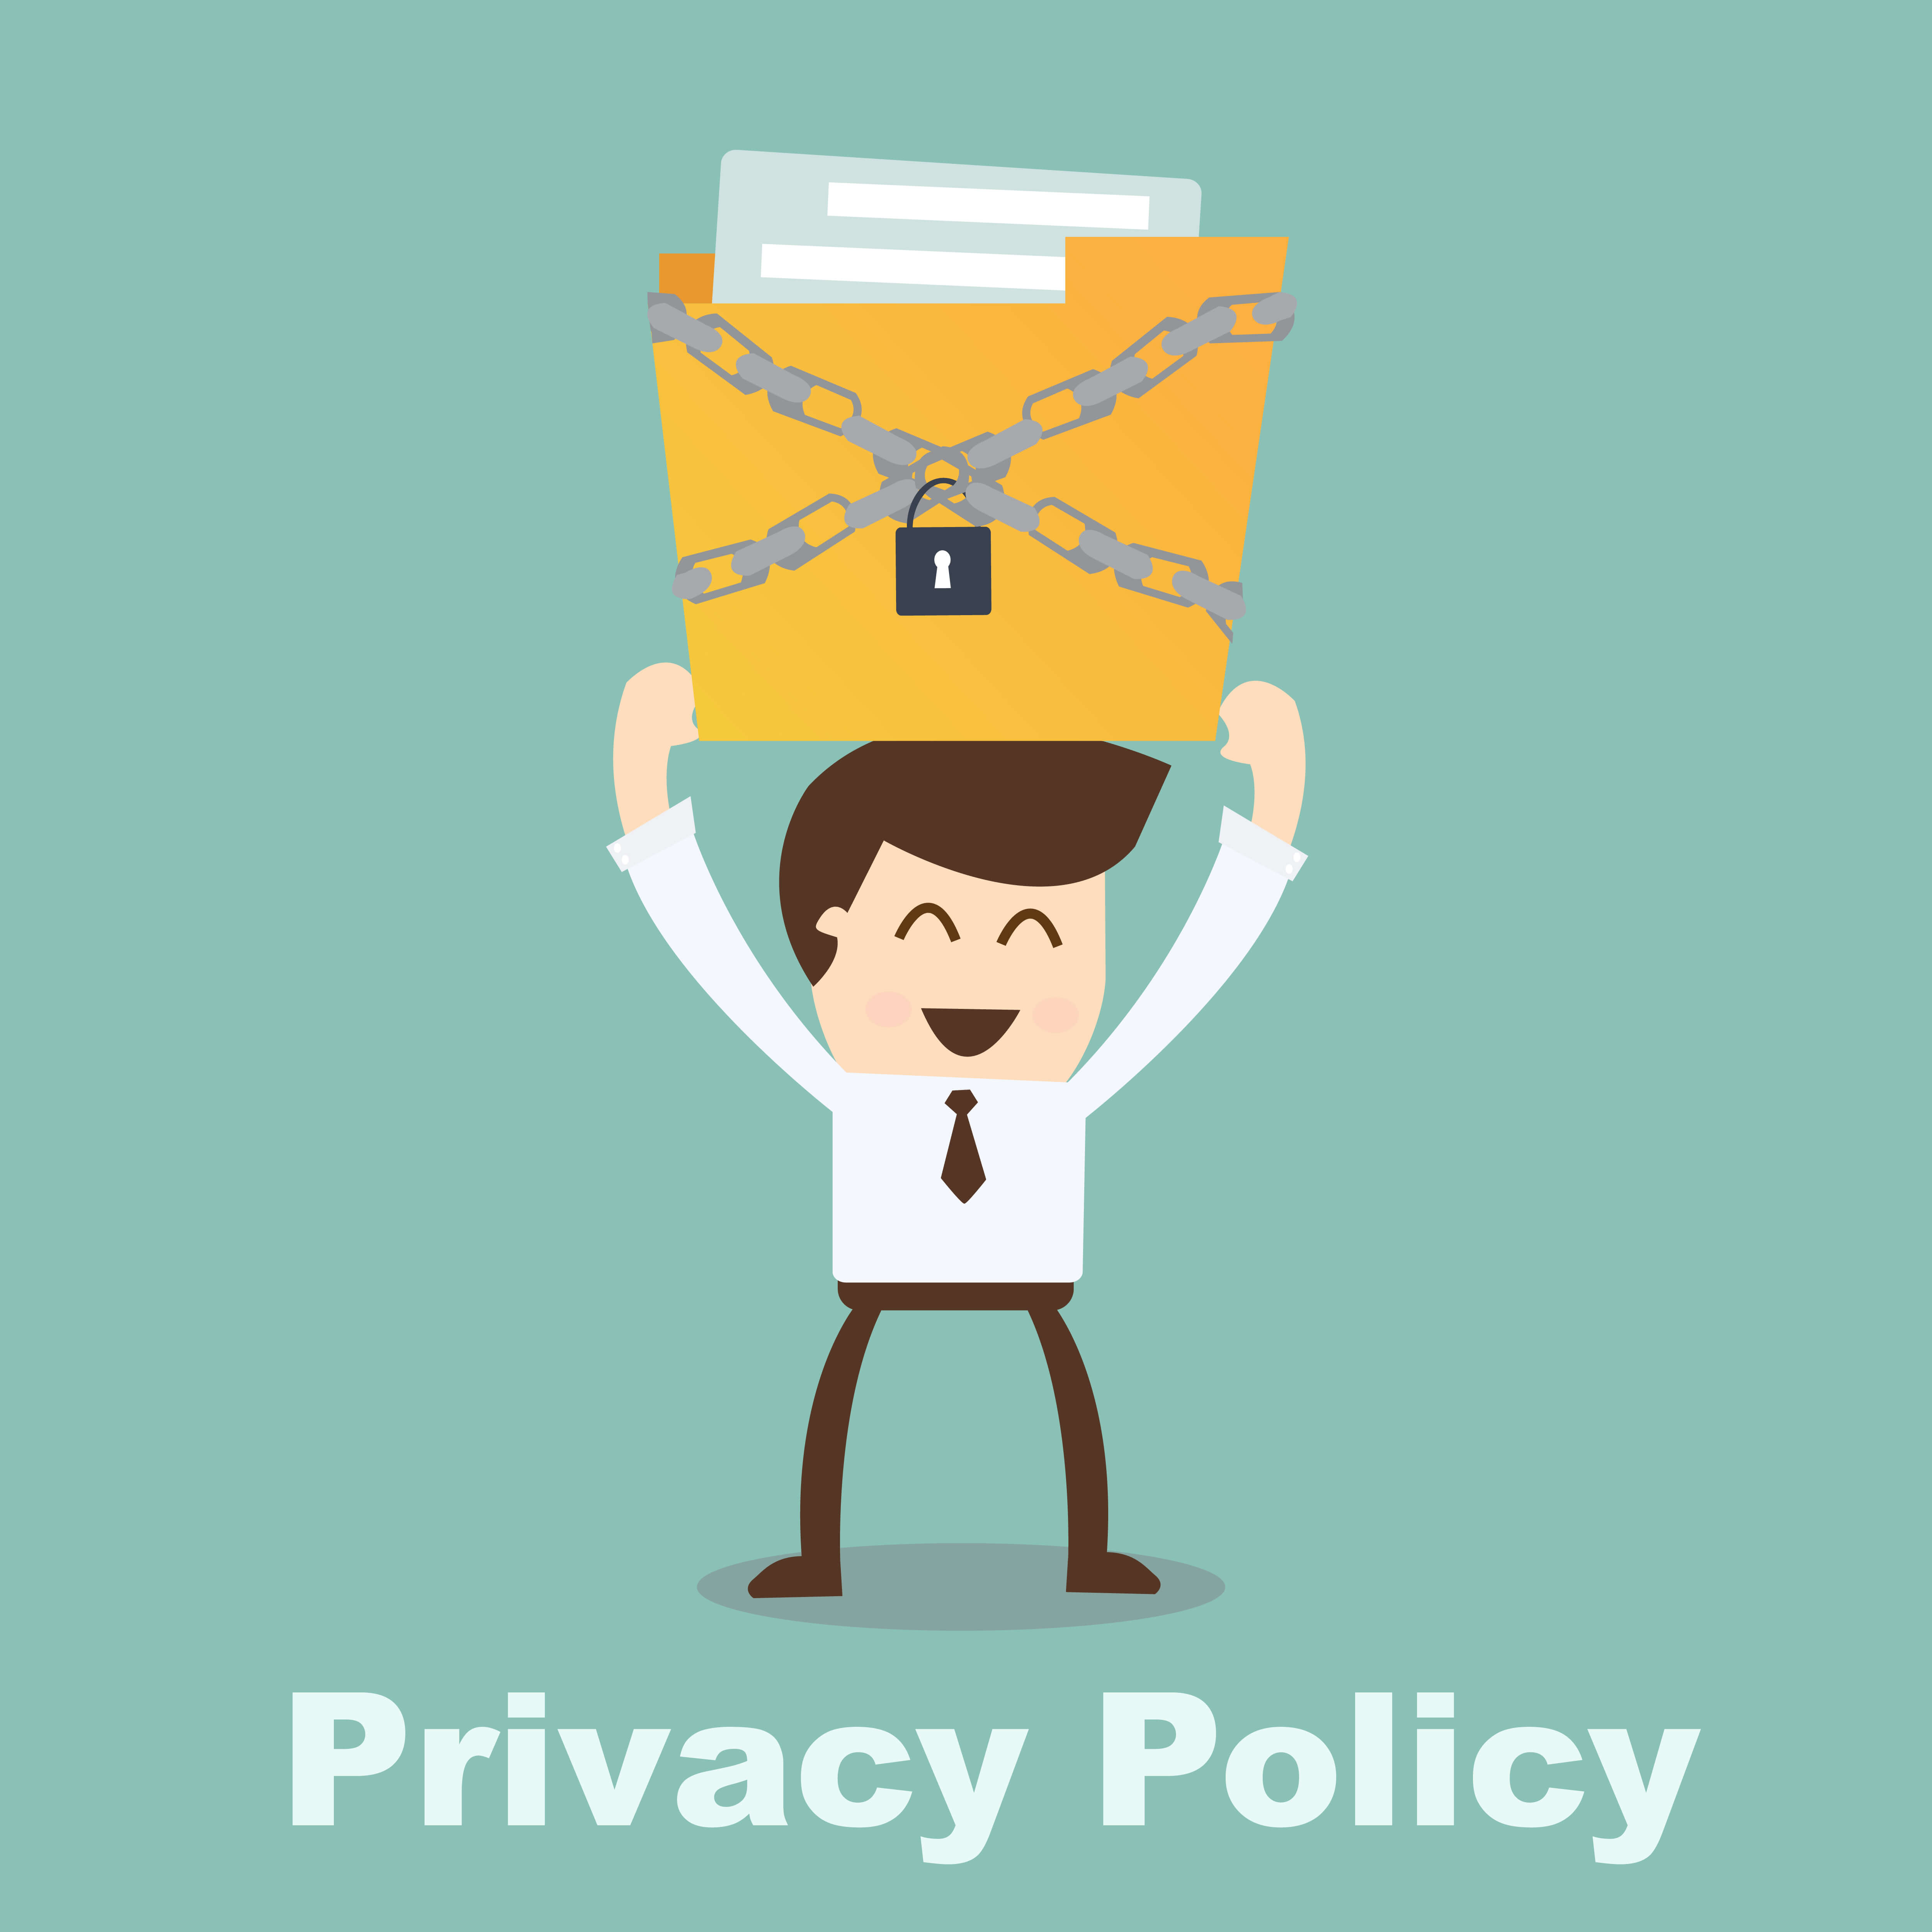 Why do People Care about Internet Privacy? 